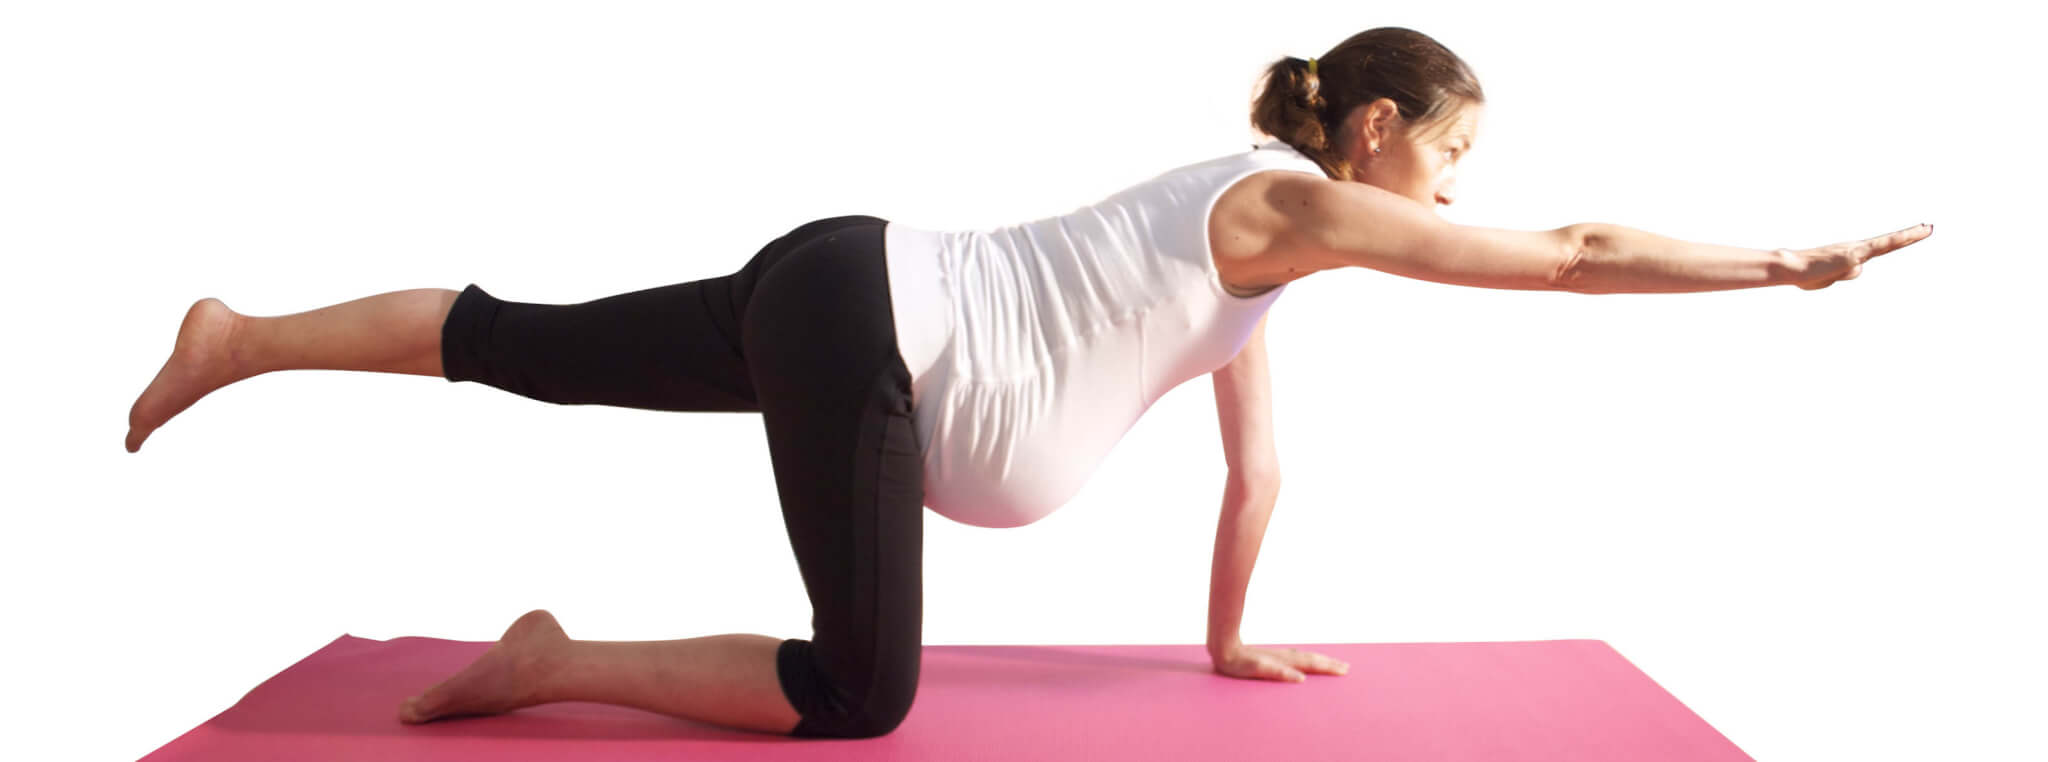 Benefits of pregnancy workouts